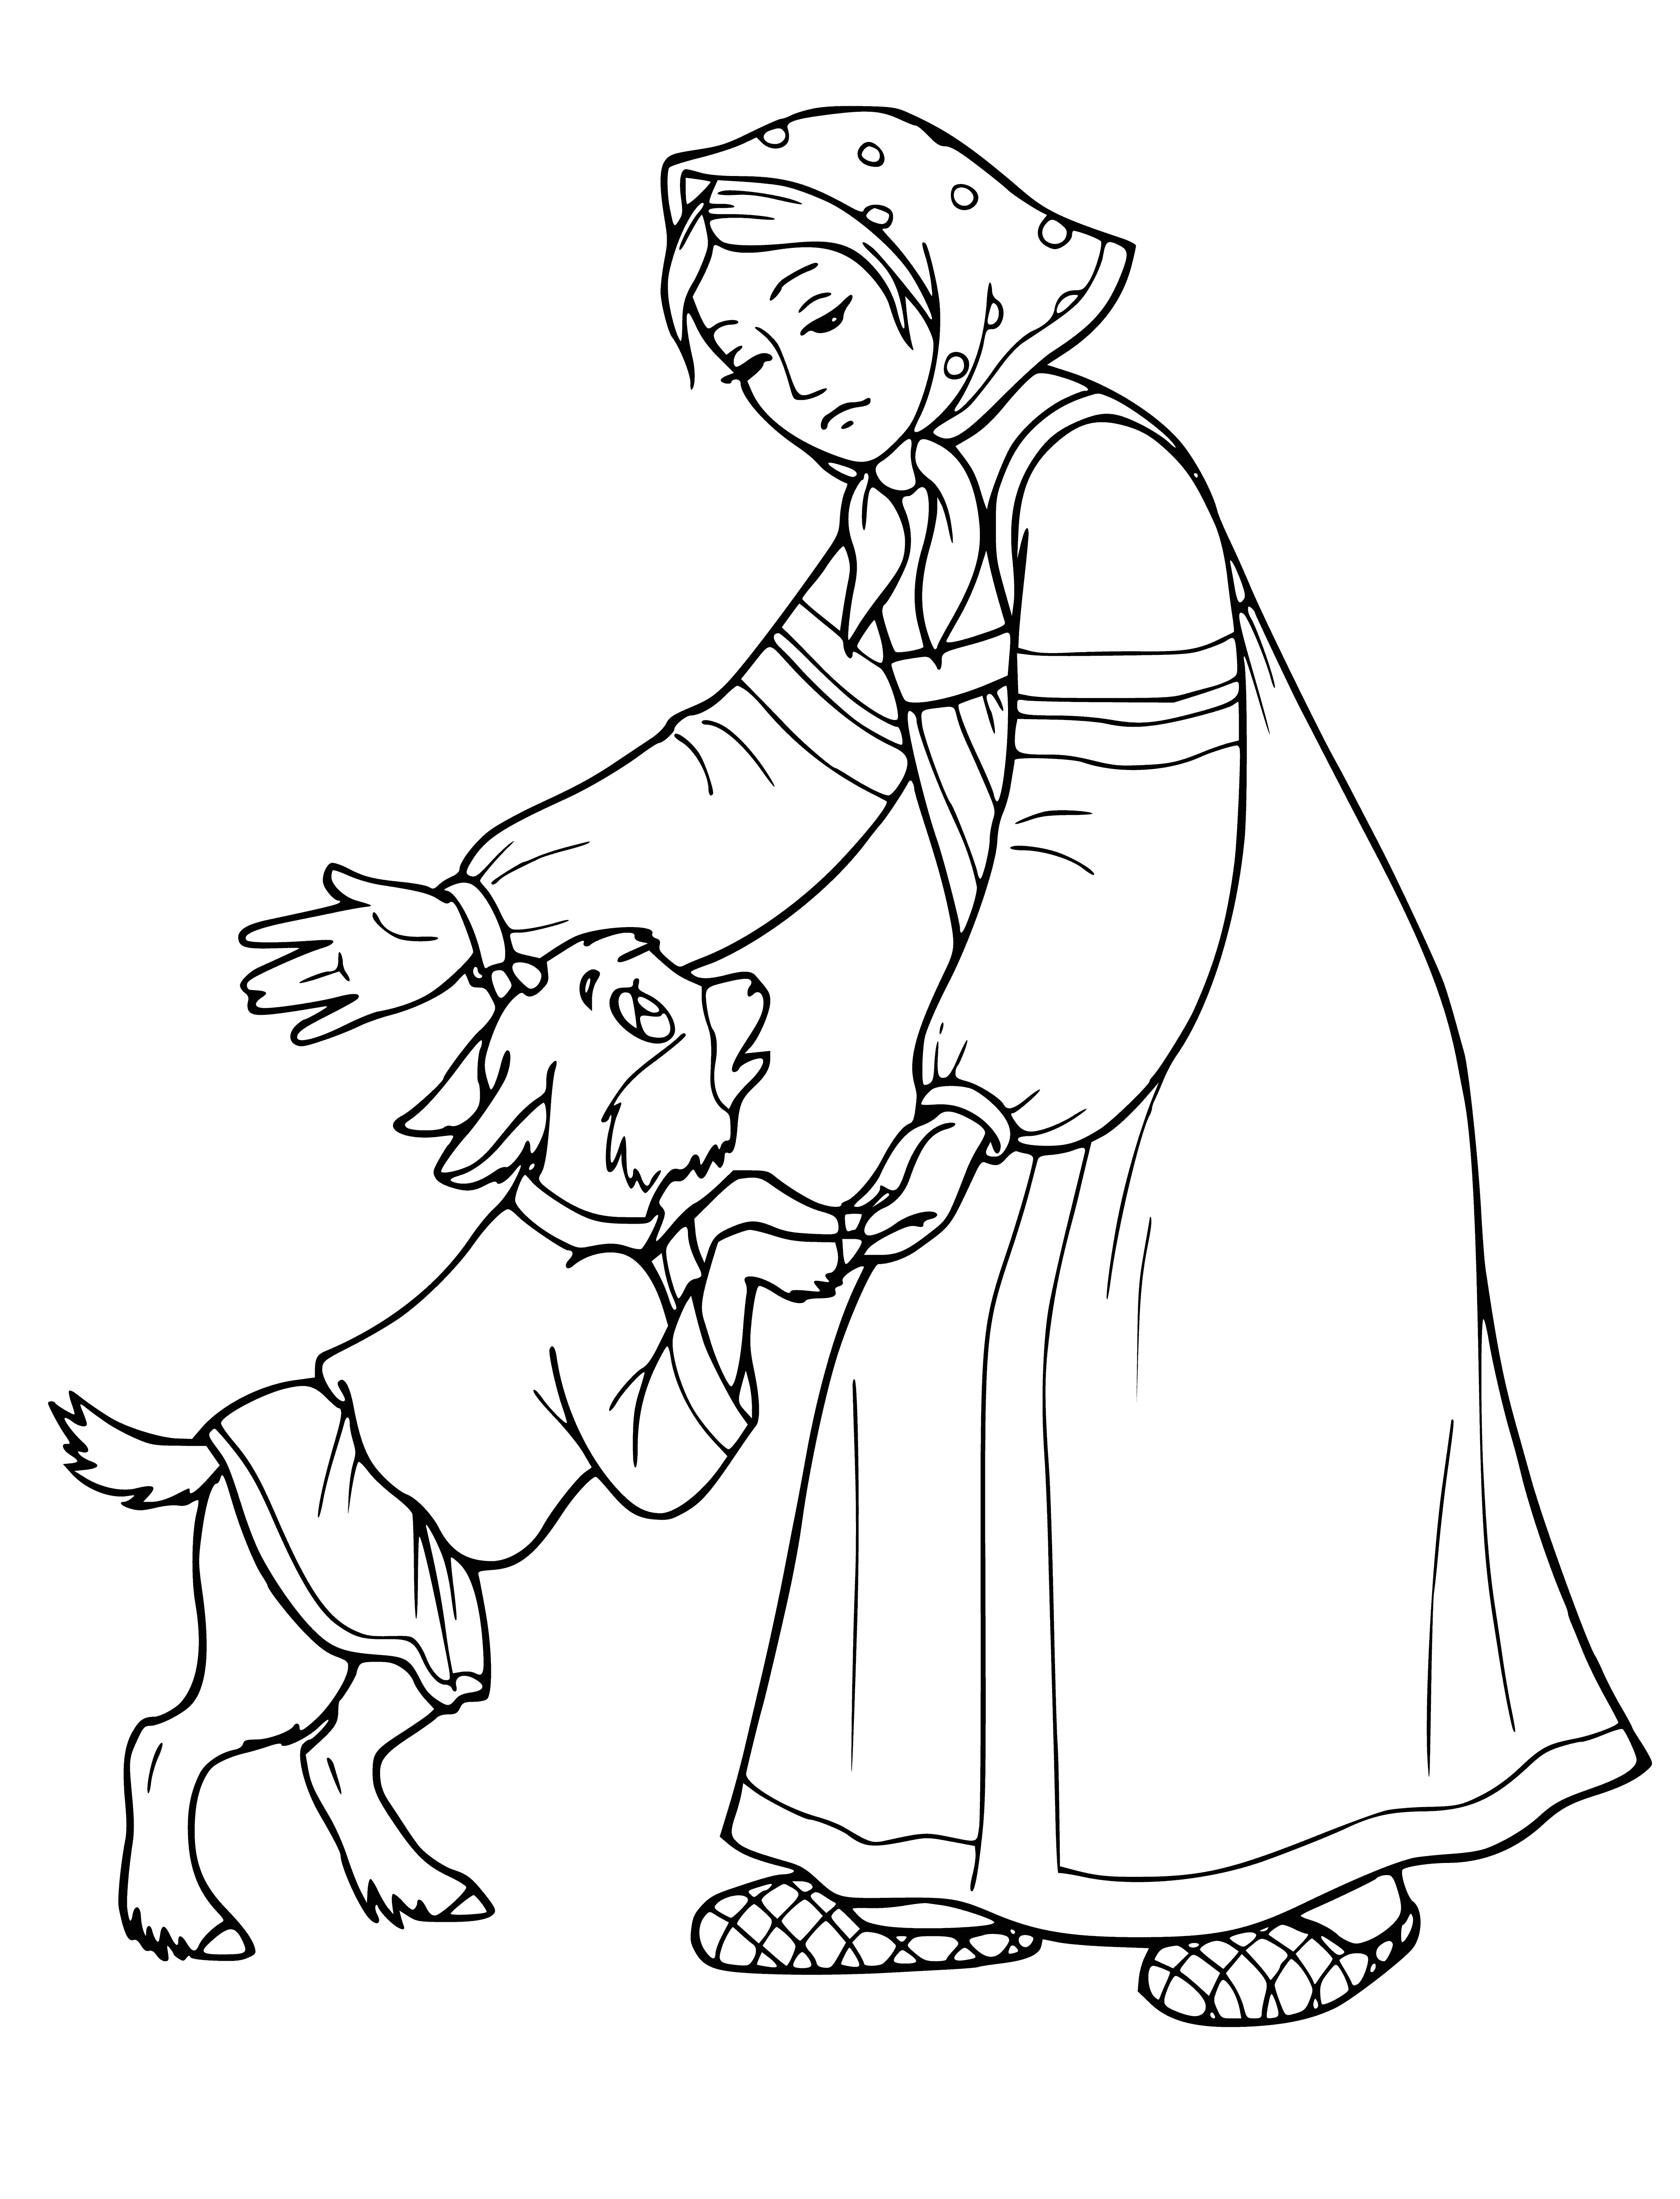 coloring page: A magical, peaceful atmosphere surrounds the scene.

Girl in traditional dress holds a baby goat in her arms, surrounded by animals in a peaceful forest scene.